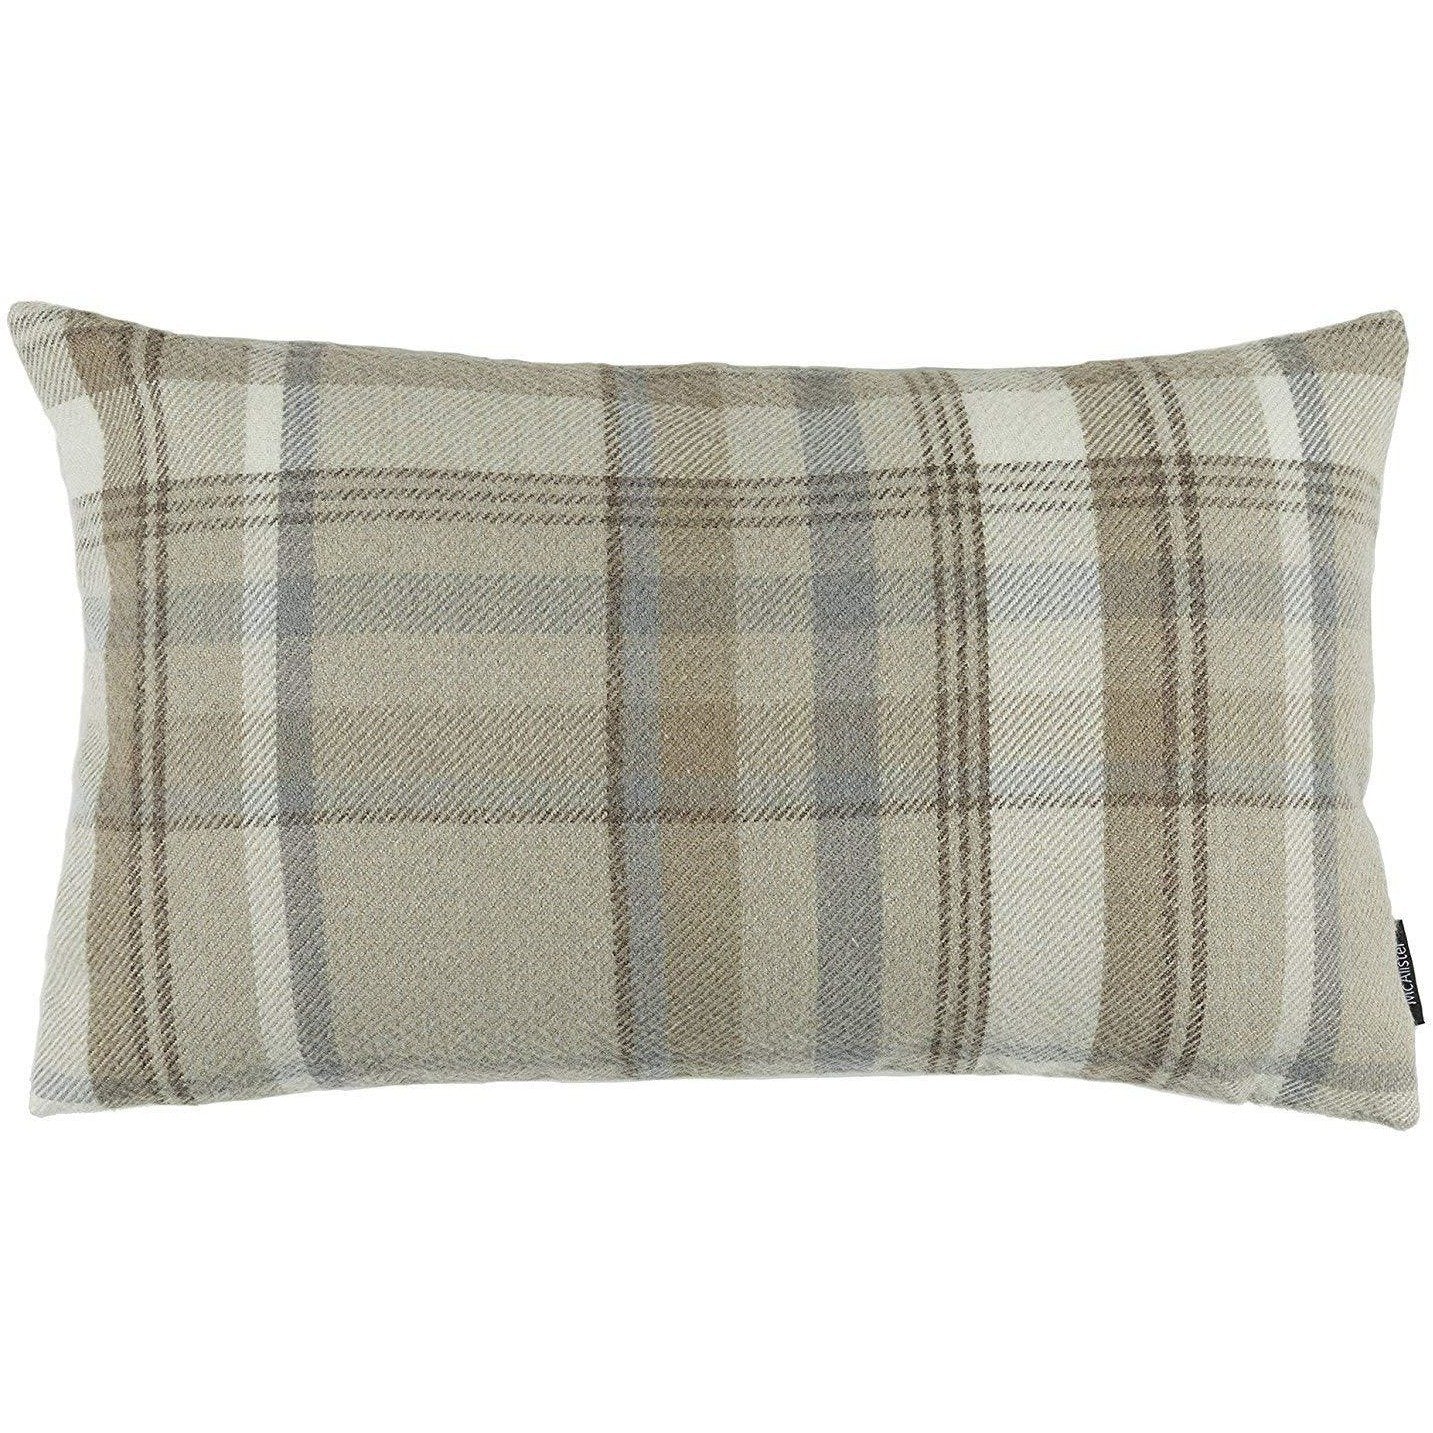 McAlister Textiles Heritage Beige Cream Tartan Cushion Cushions and Covers Cover Only 50cm x 30cm 